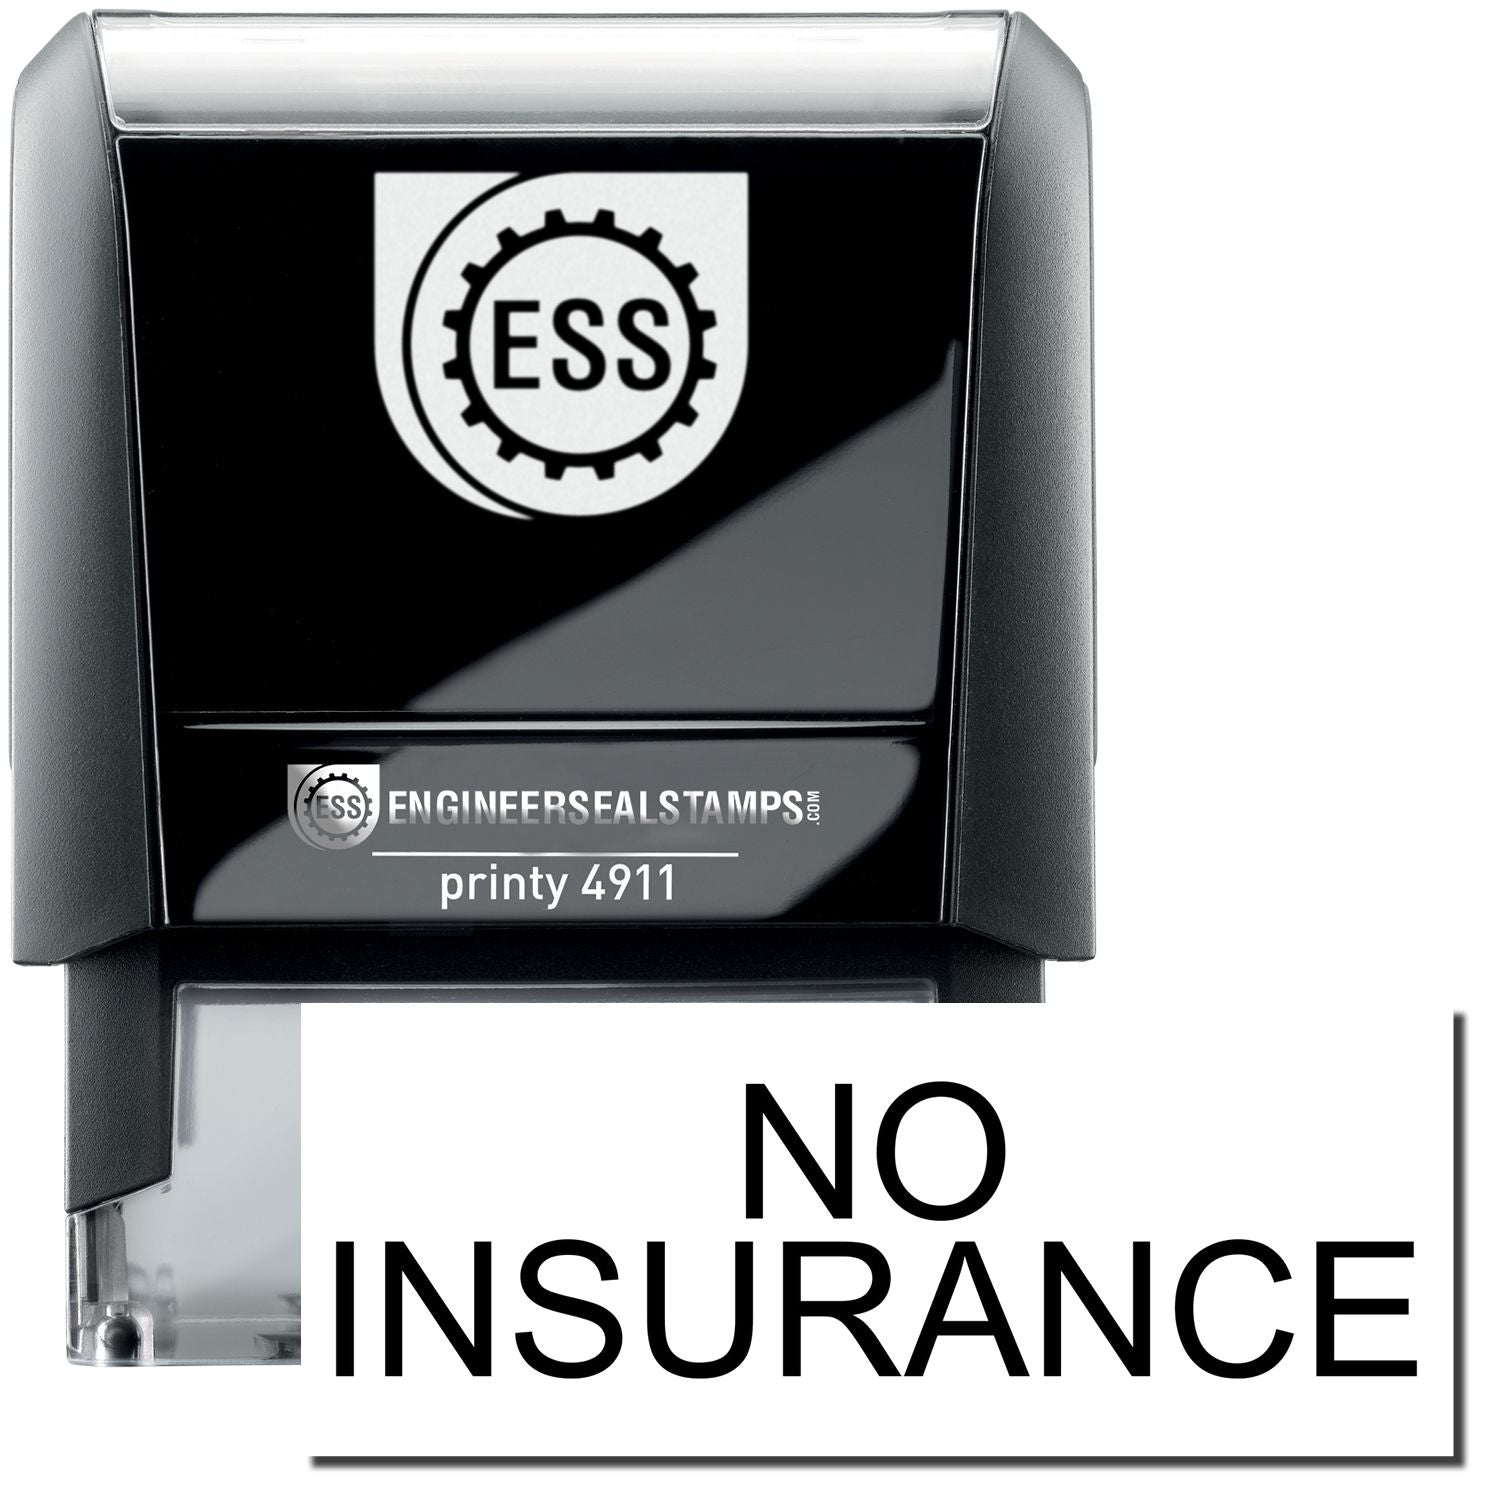 A self-inking stamp with a stamped image showing how the text "NO INSURANCE" is displayed after stamping.